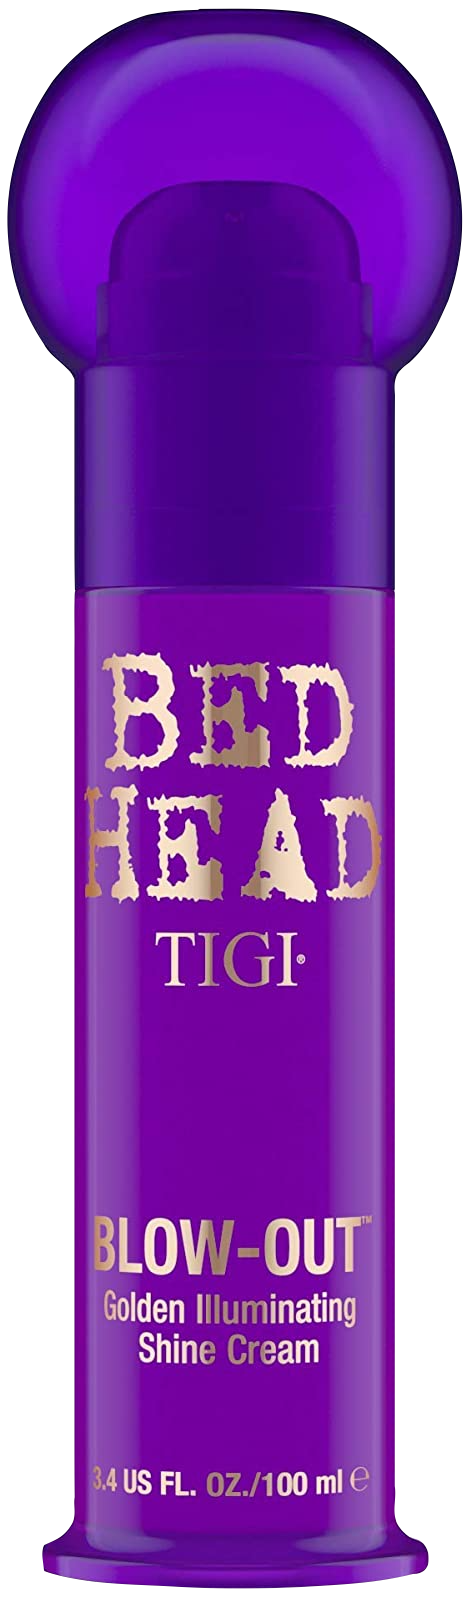 Bed Head - Blow-Out - Golden Illuminating Shine Cream